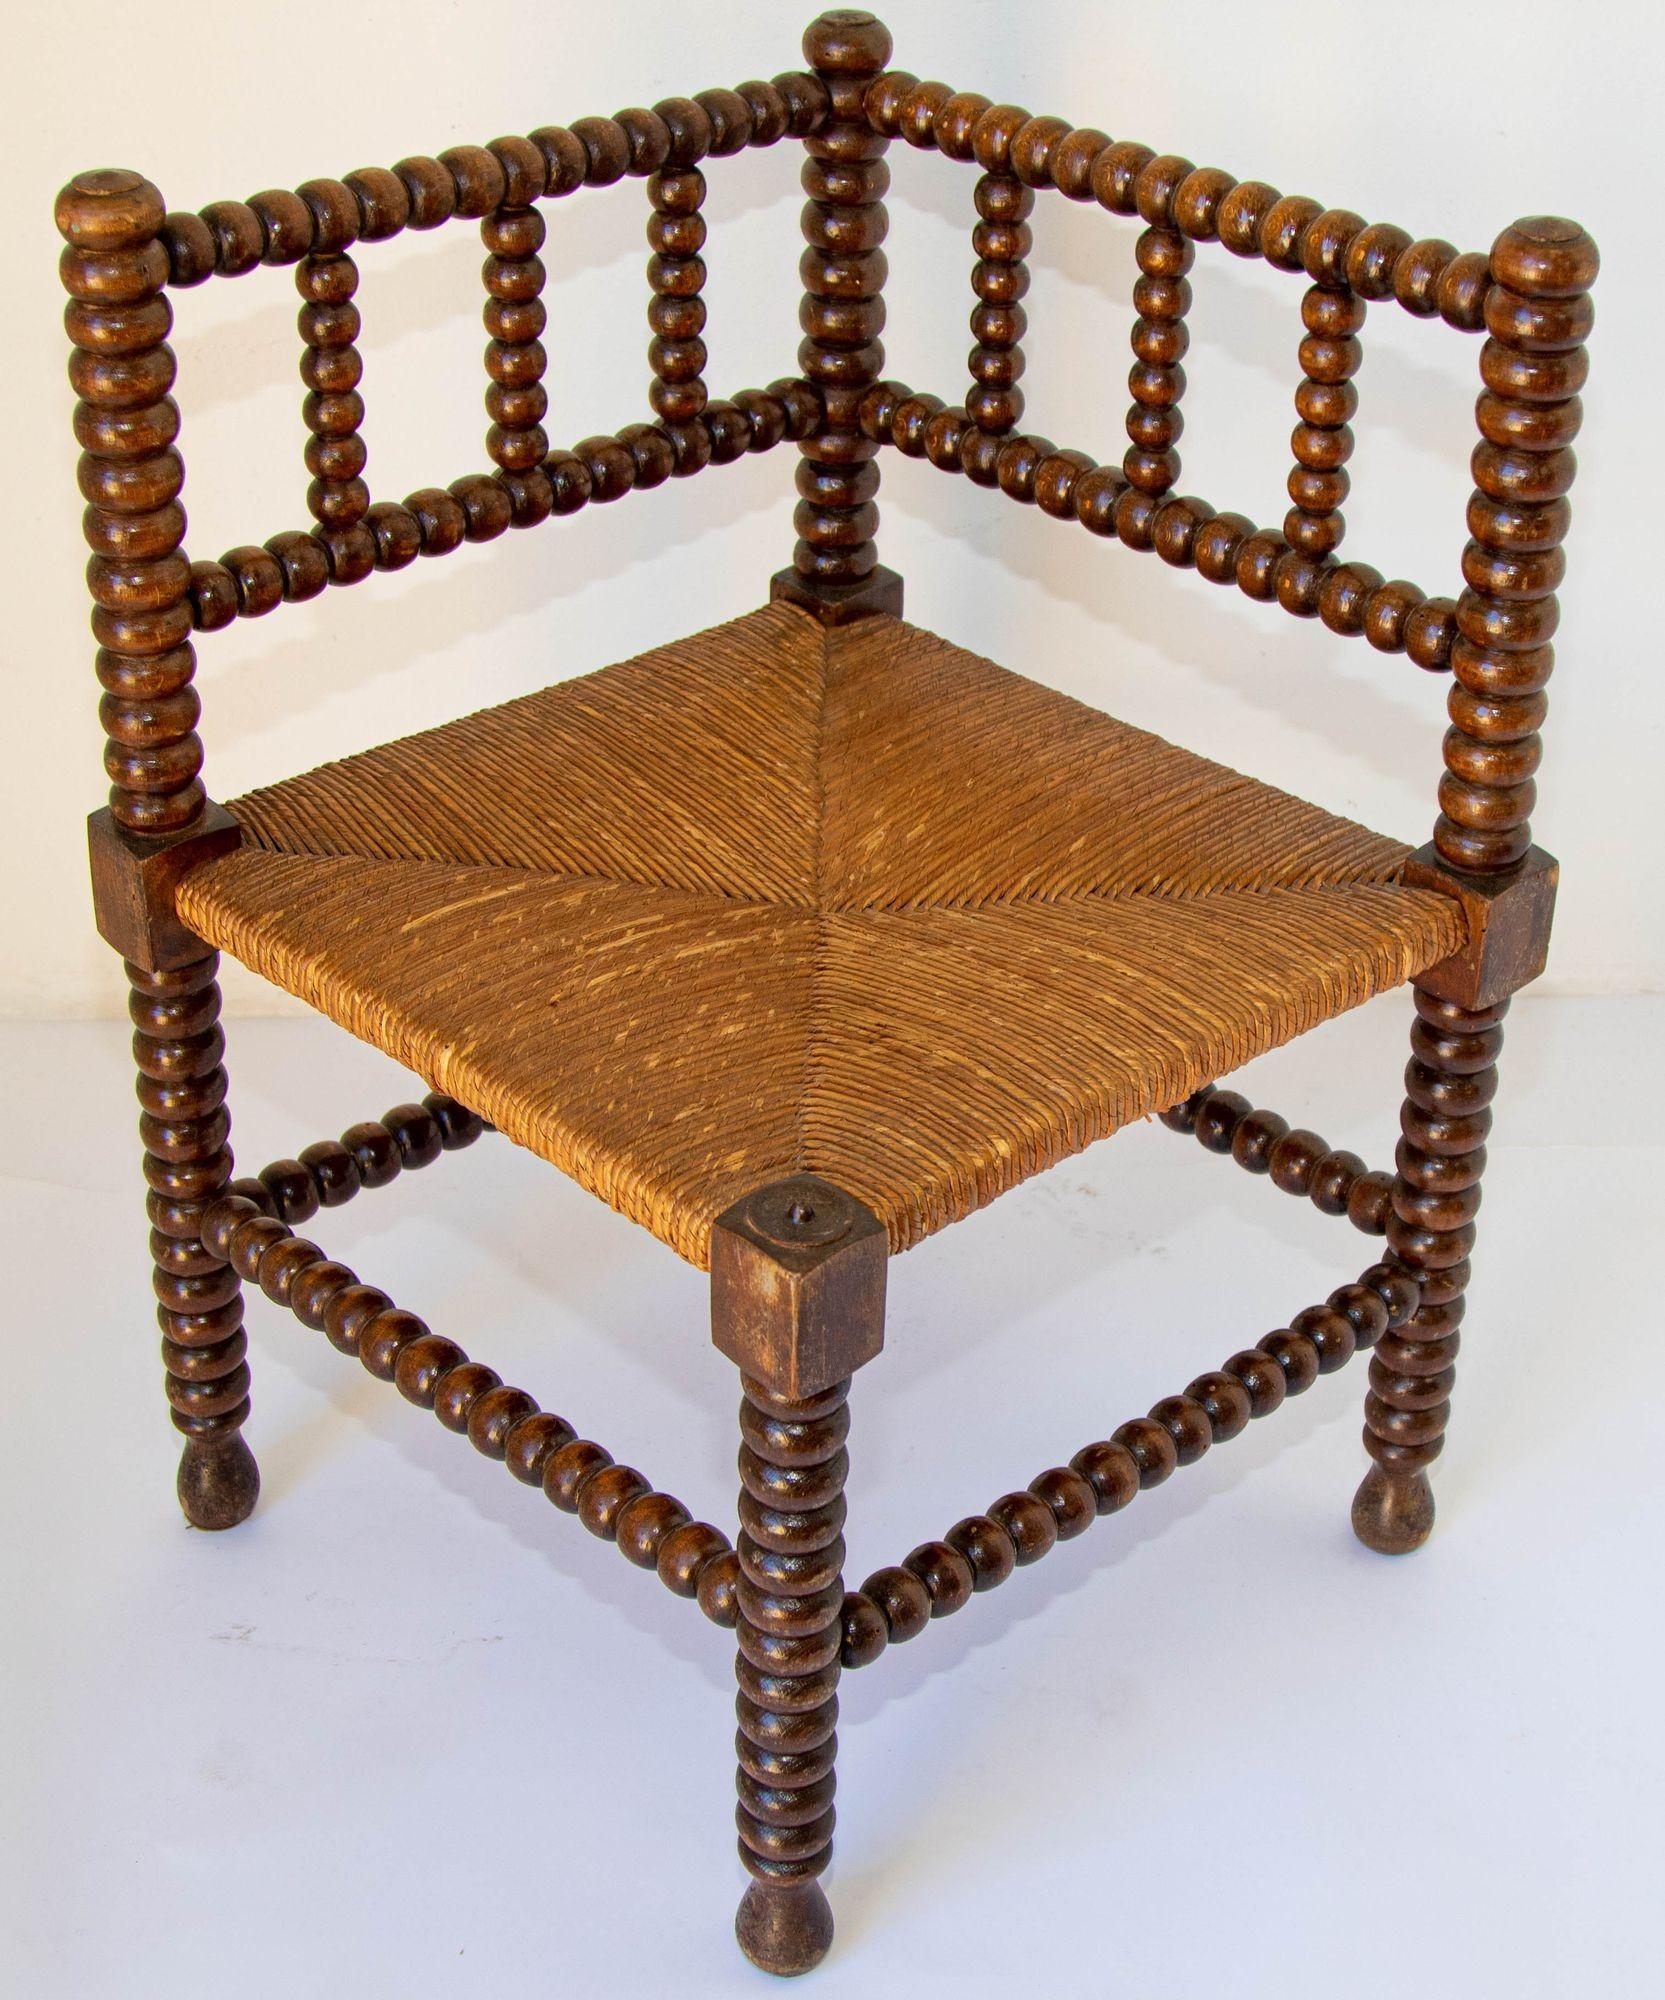 Antique French Provincial Rush Corner Chair Carved Oak 19th C. In Good Condition For Sale In North Hollywood, CA